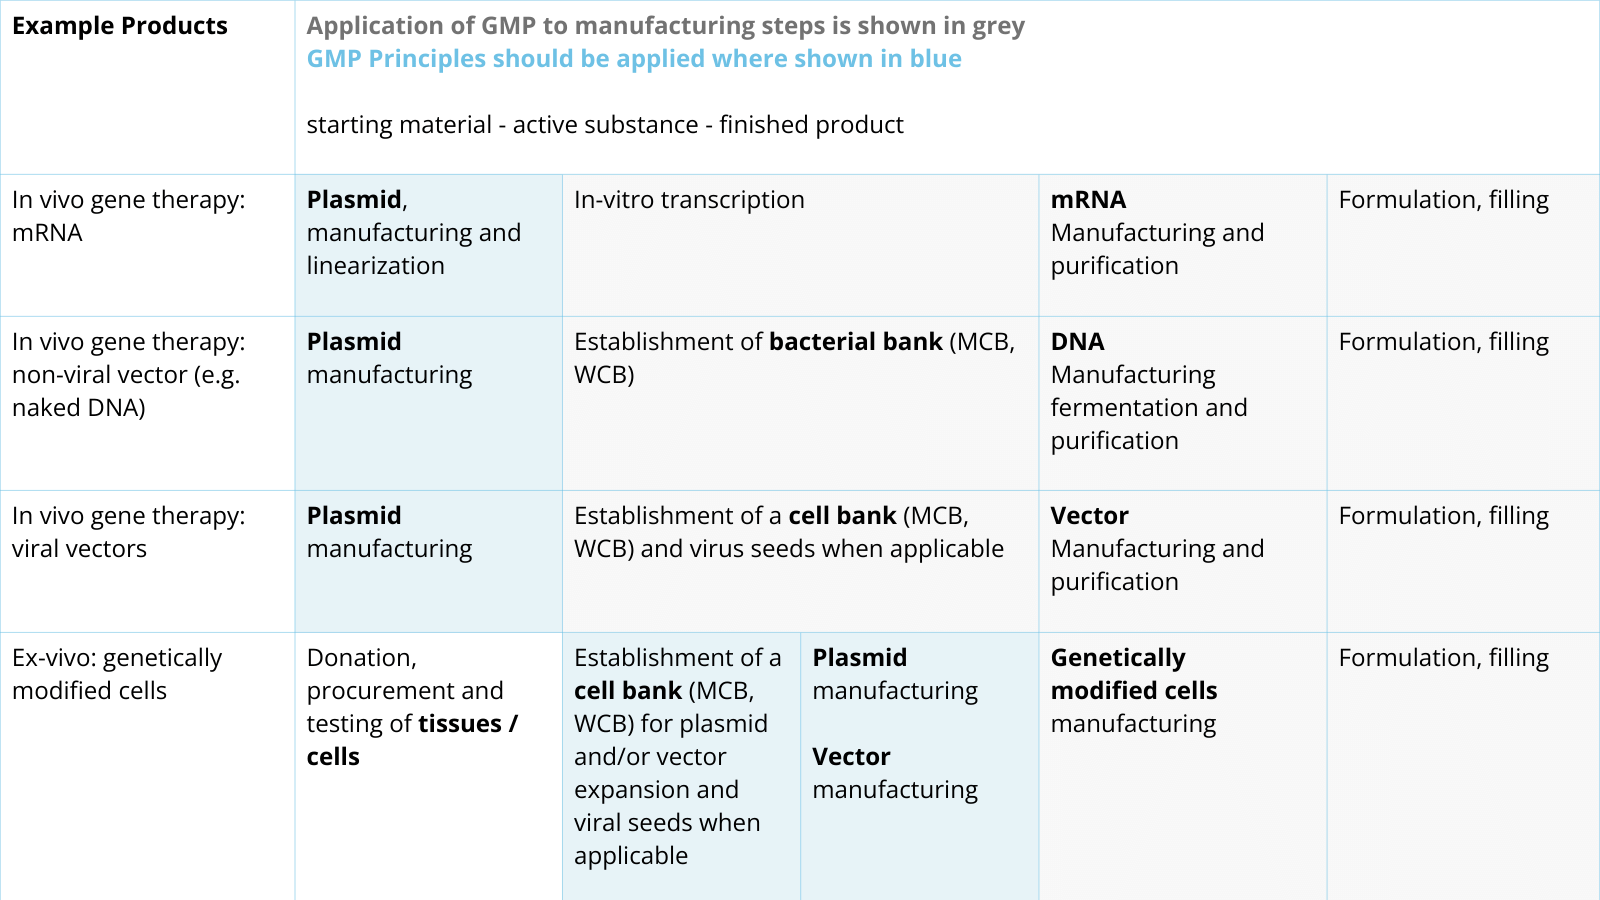 Examples of where GMP or GMP principles apply in the manufacturing. The AMTP starting materials are underlined and the ATMP active substances appear in bold.